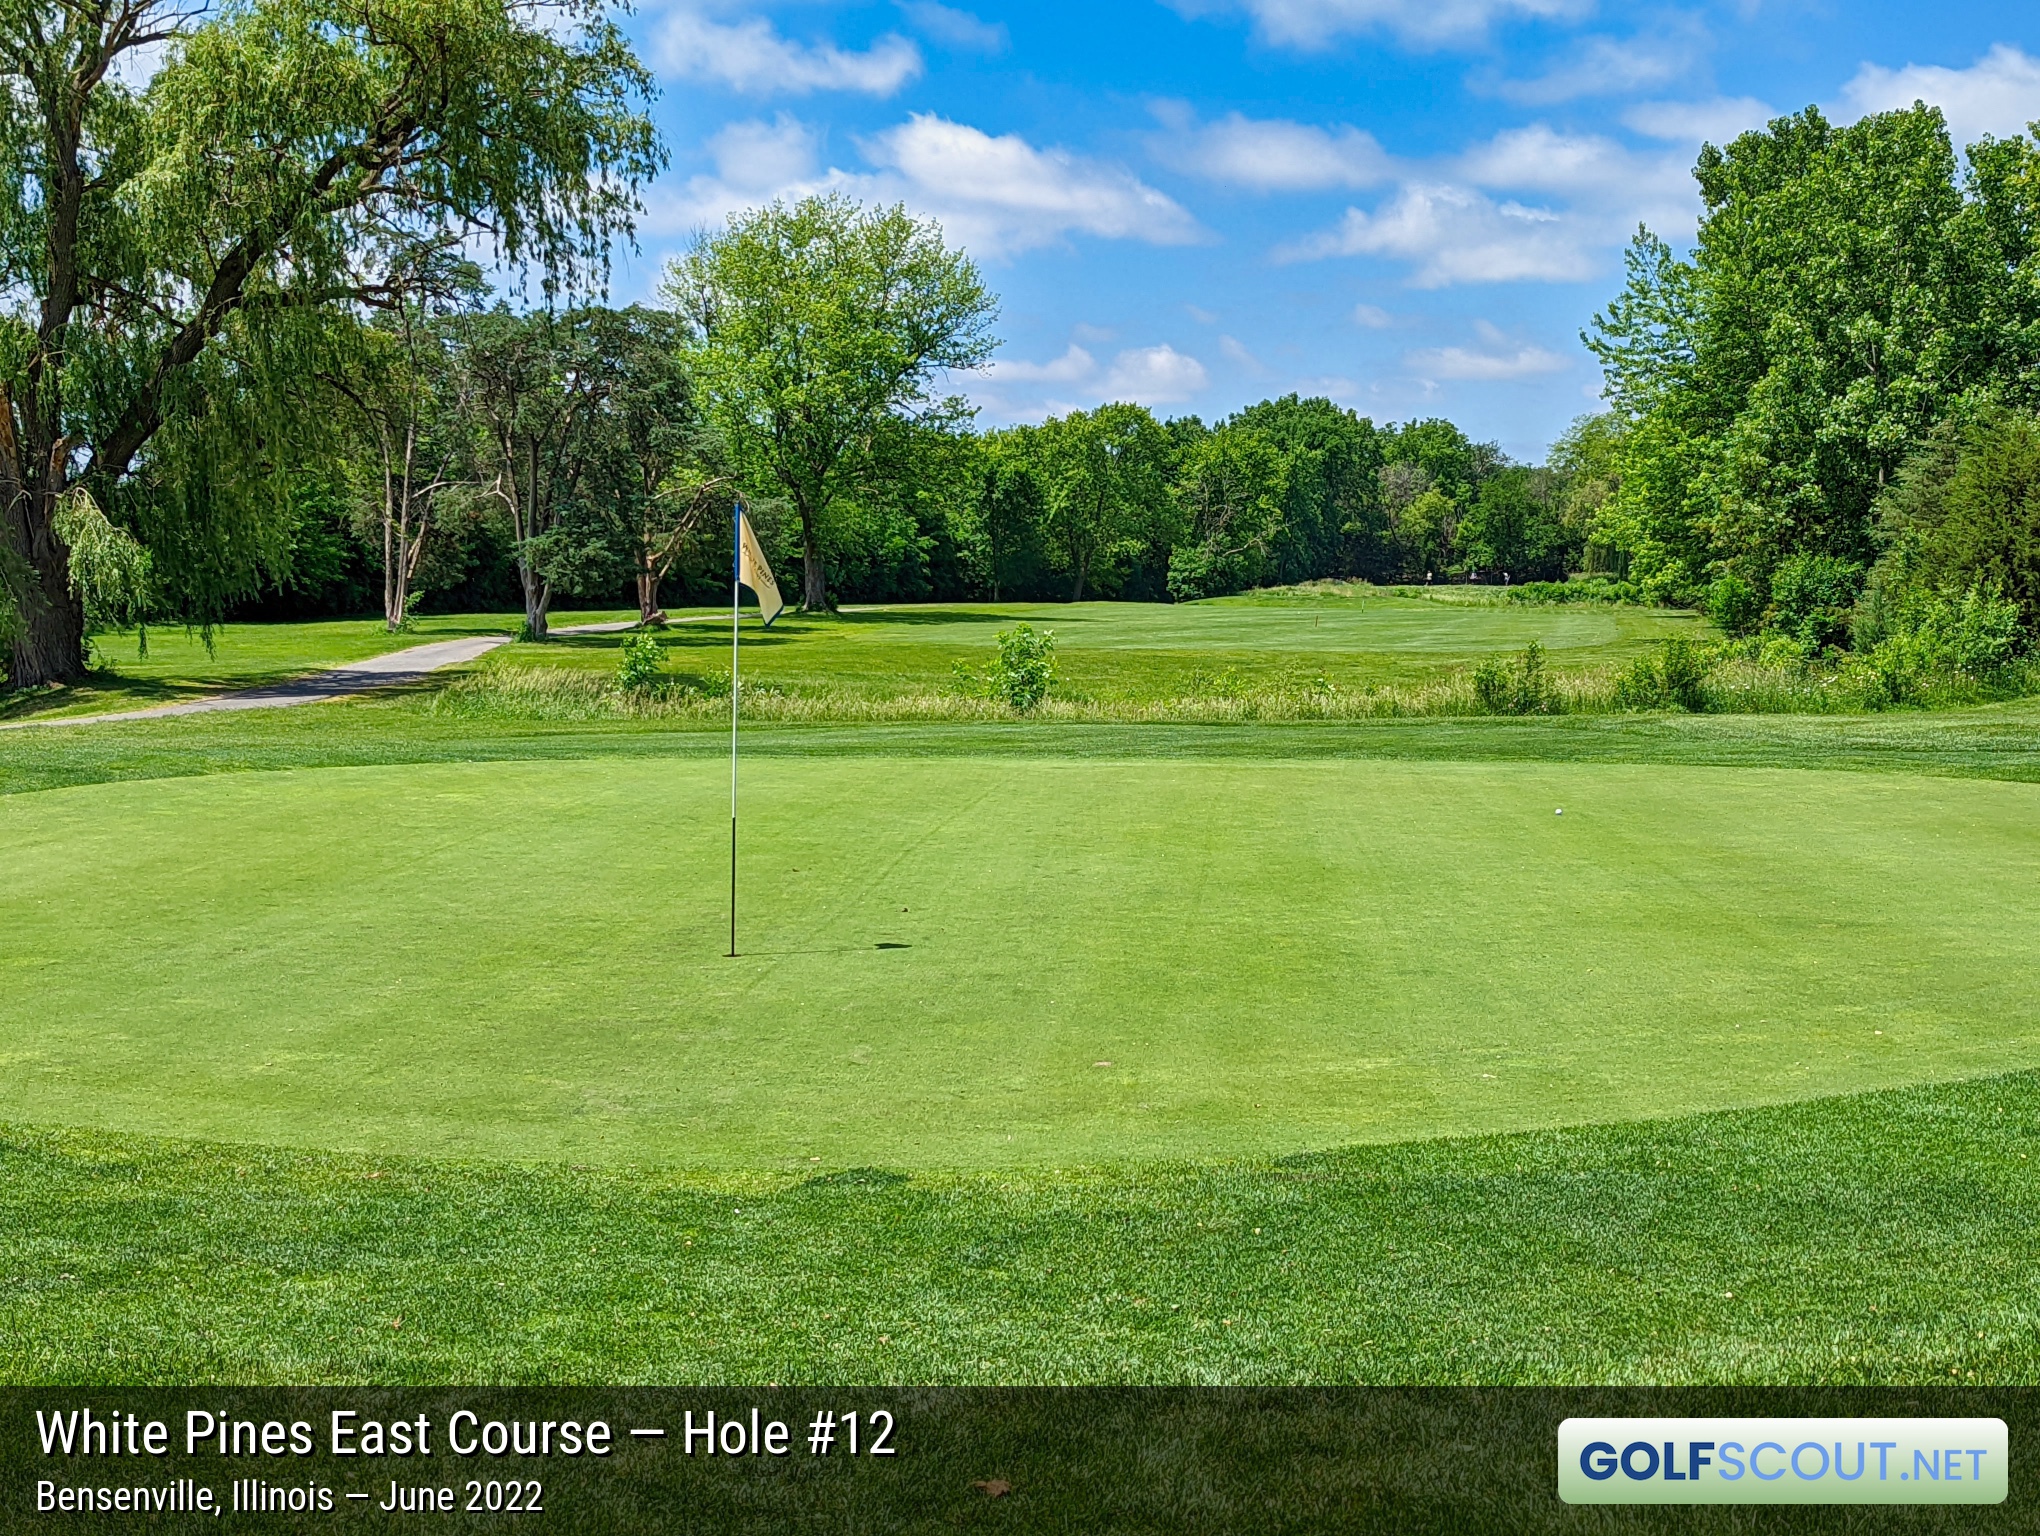 Photo of hole #12 at White Pines East Course in Bensenville, Illinois. 